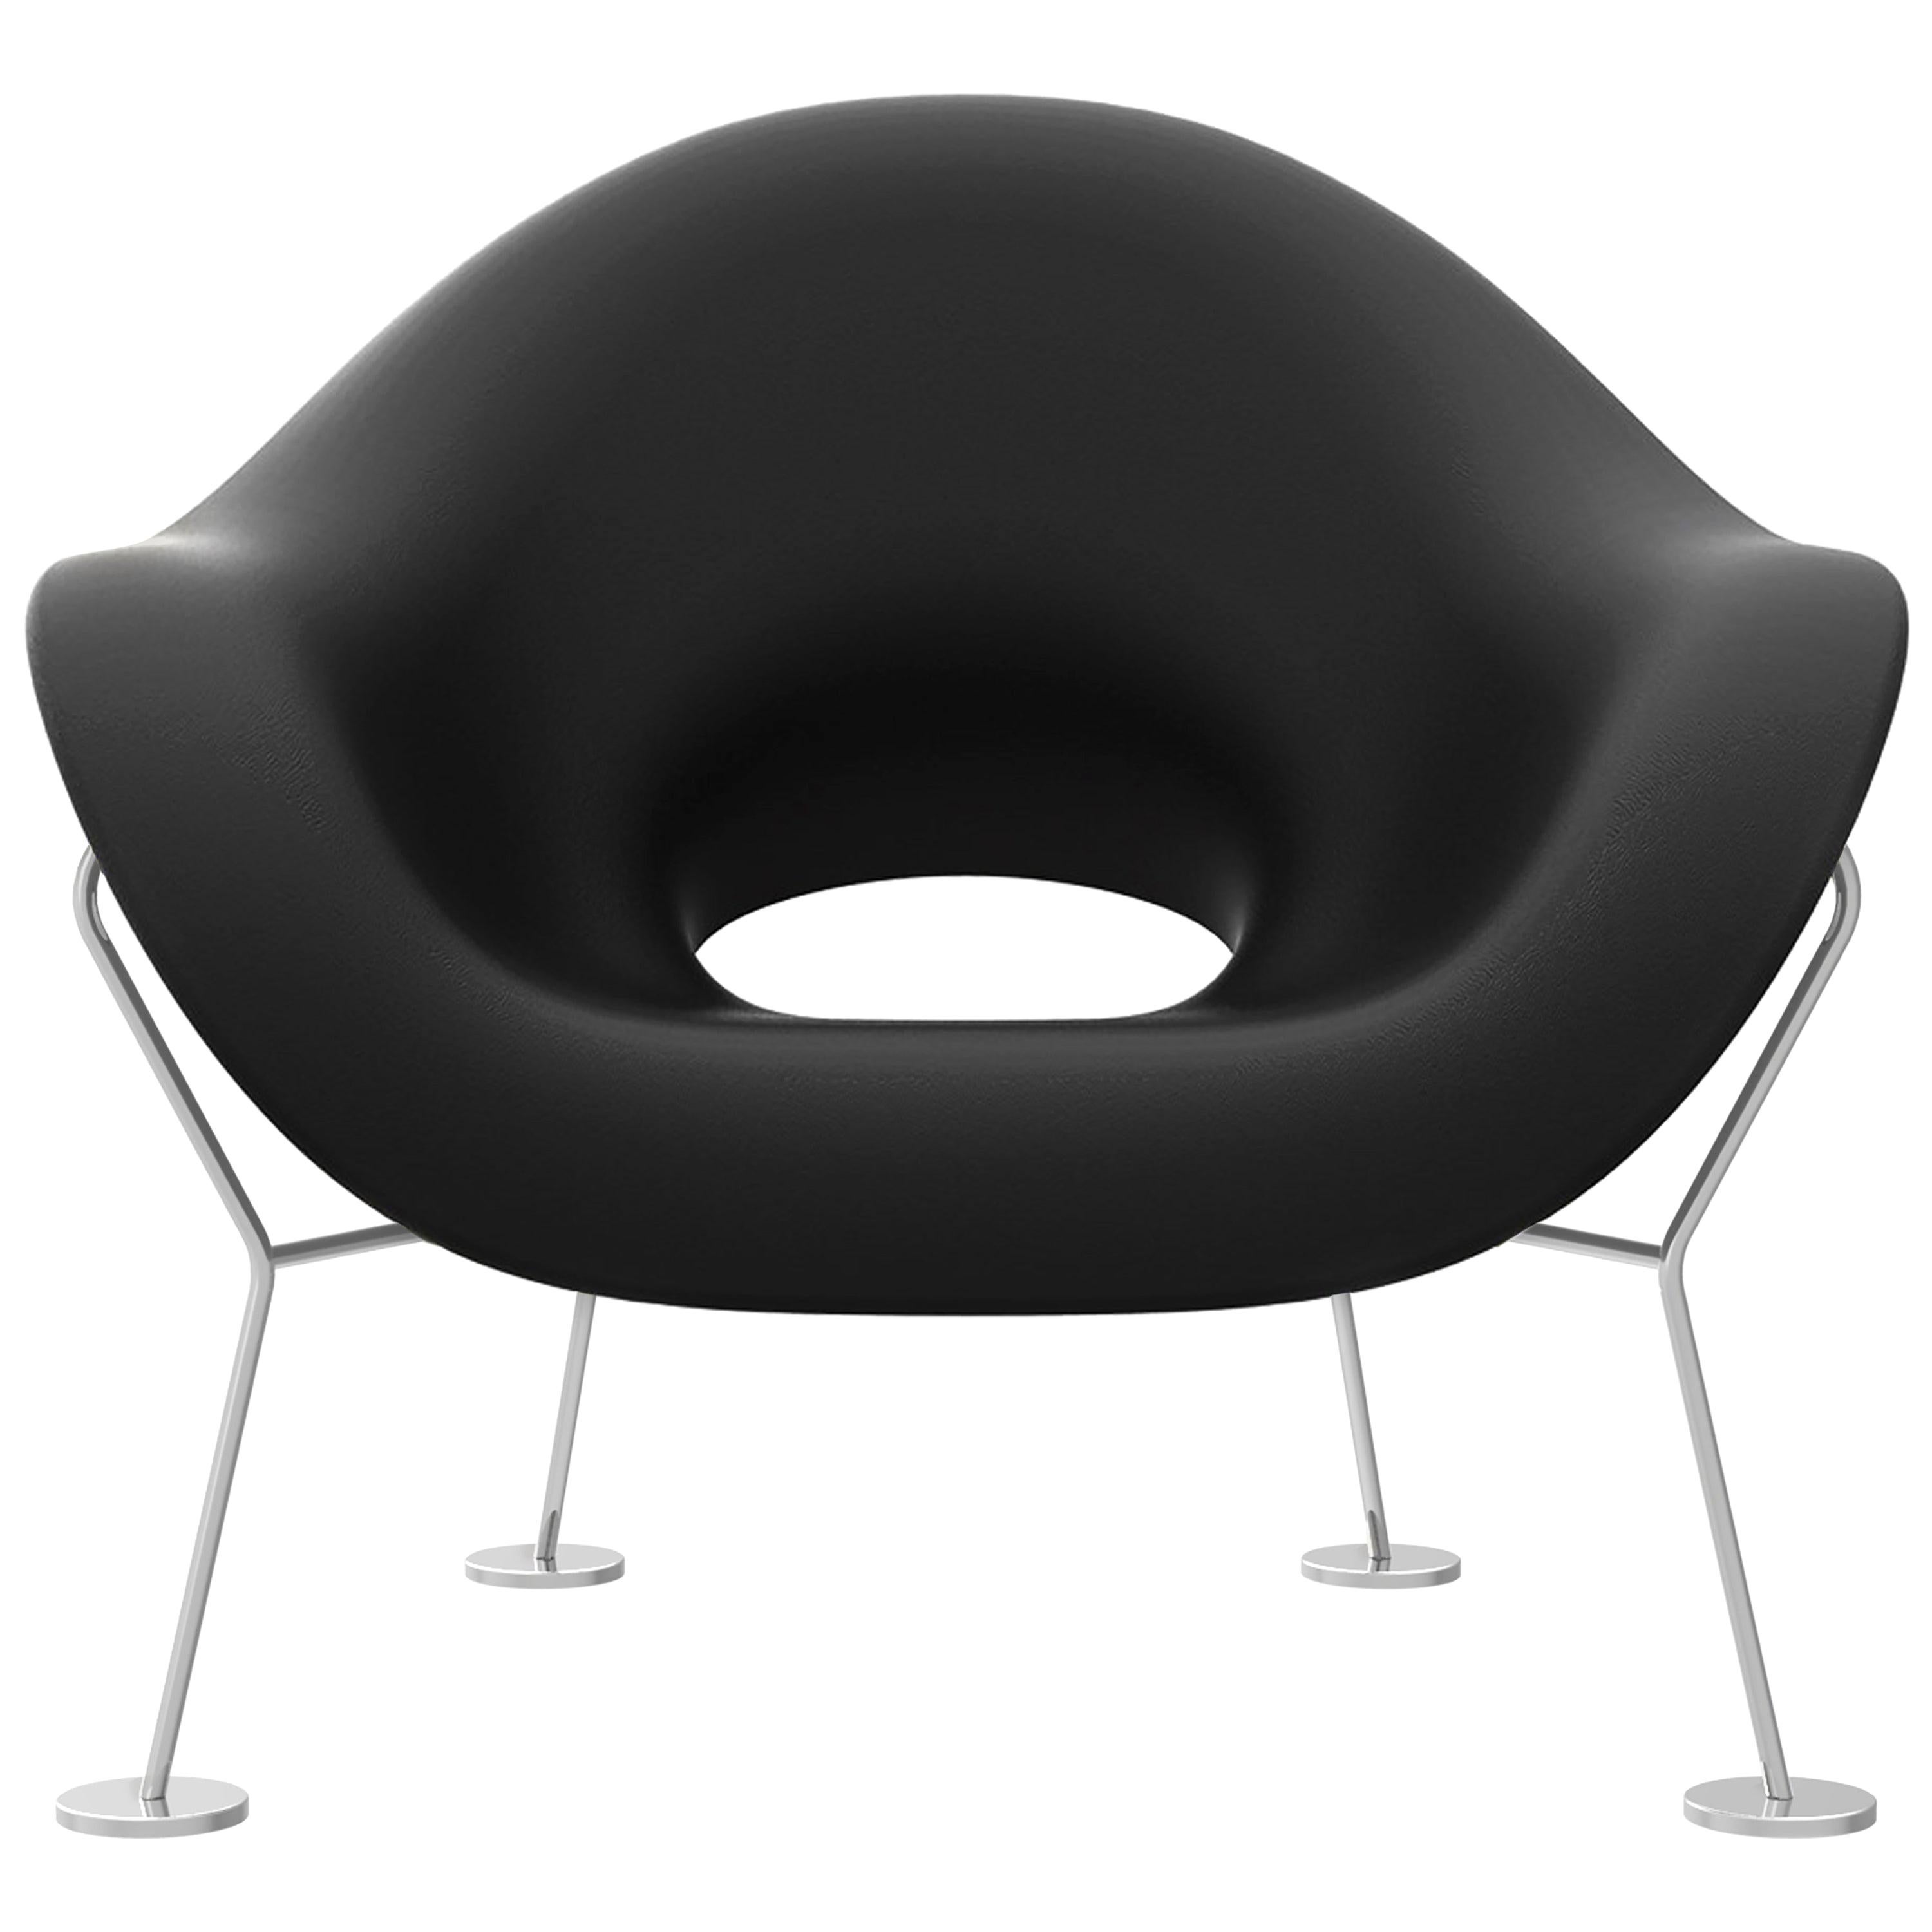 Plush Modern Black Side or Arm Chair with Chrome Legs by Andrea Branzi